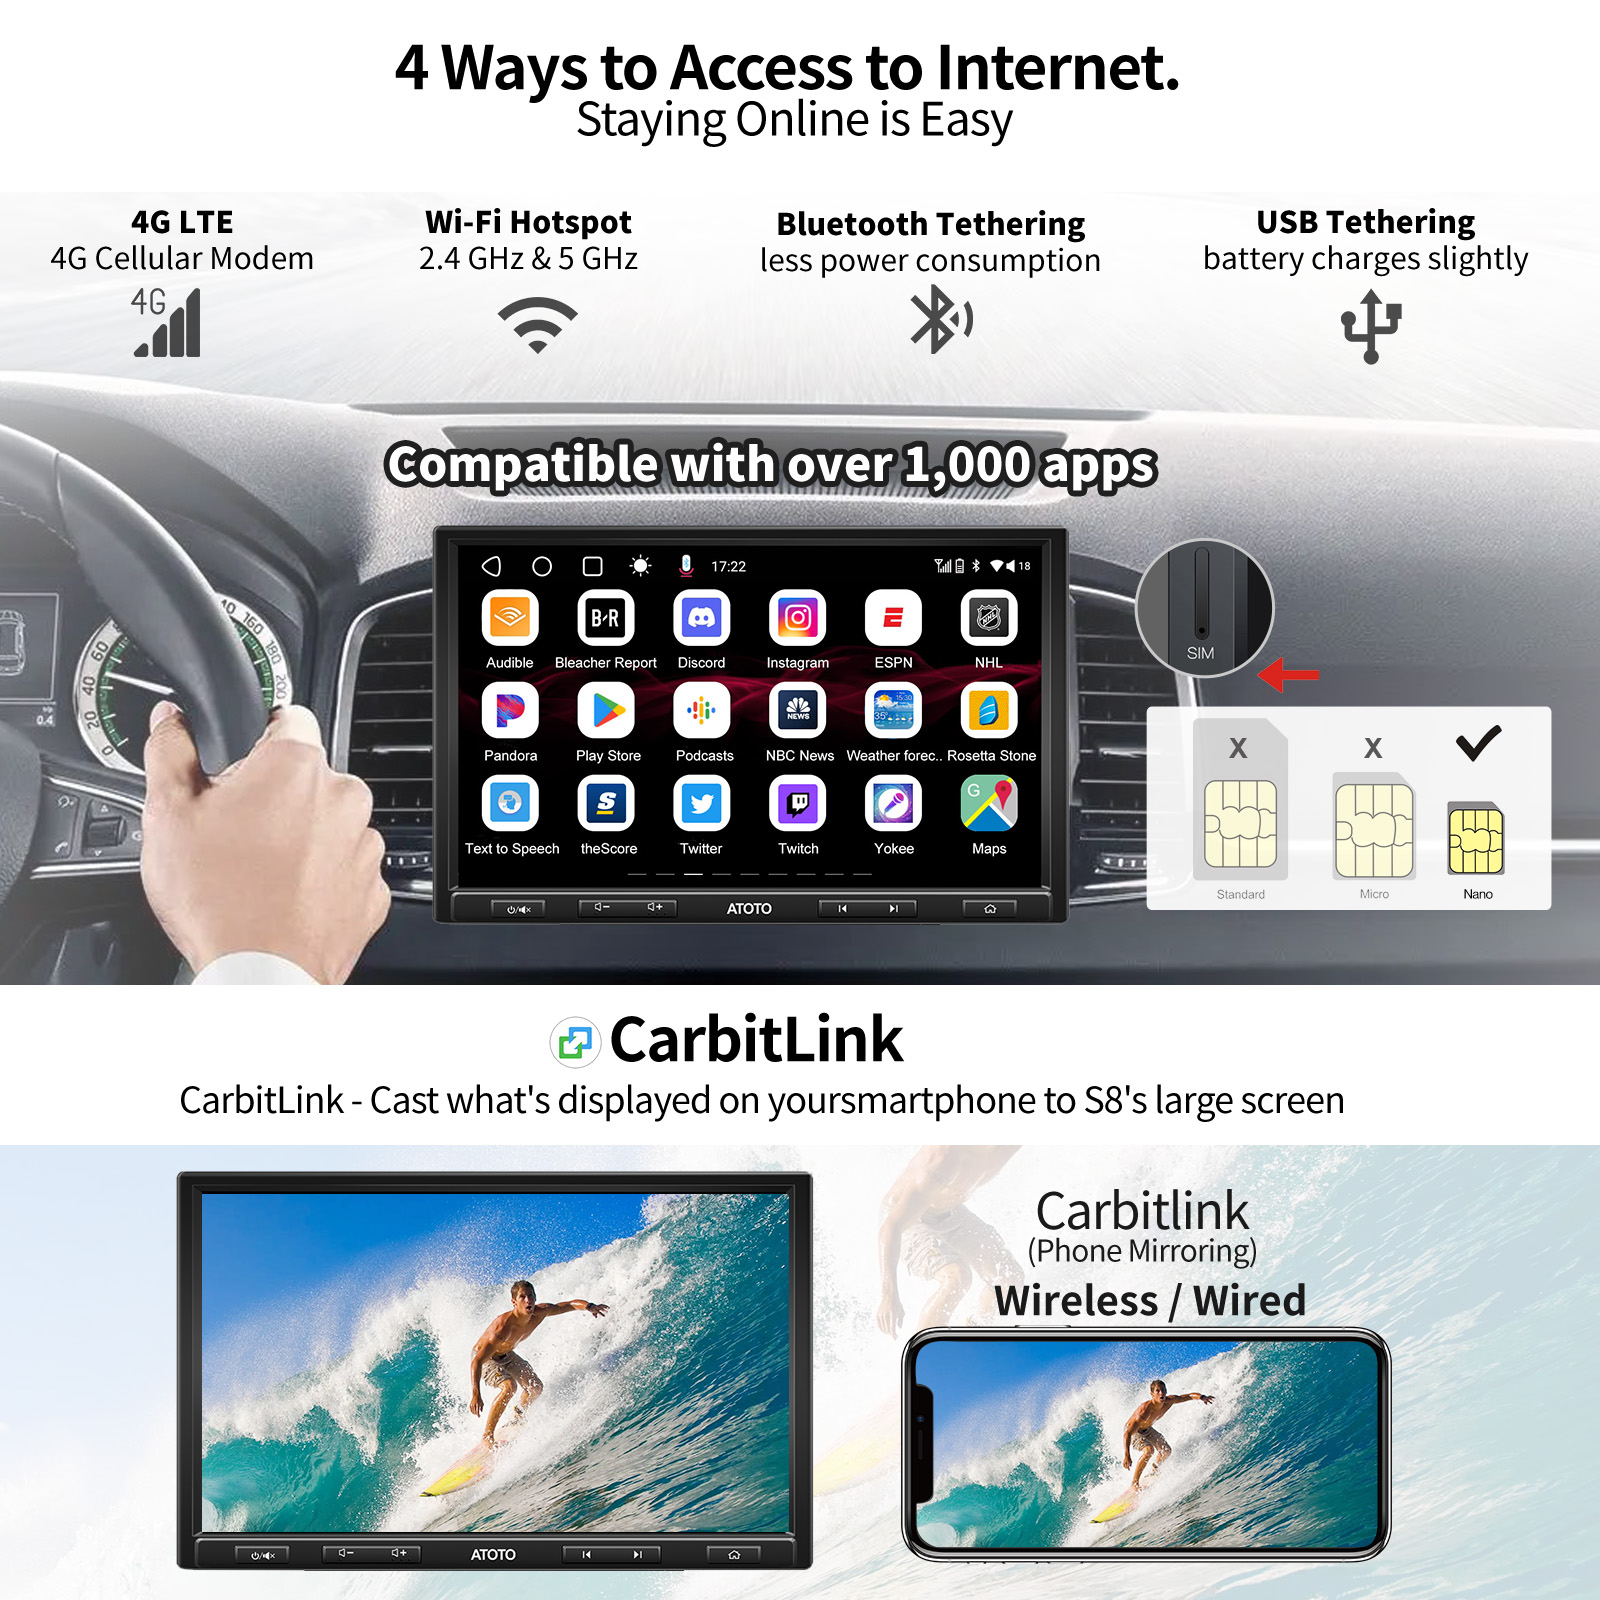 ATOTO 8 Floating IPS Display 1DIN Android 10 Car Stereo w/ Android  Auto/CarPlay